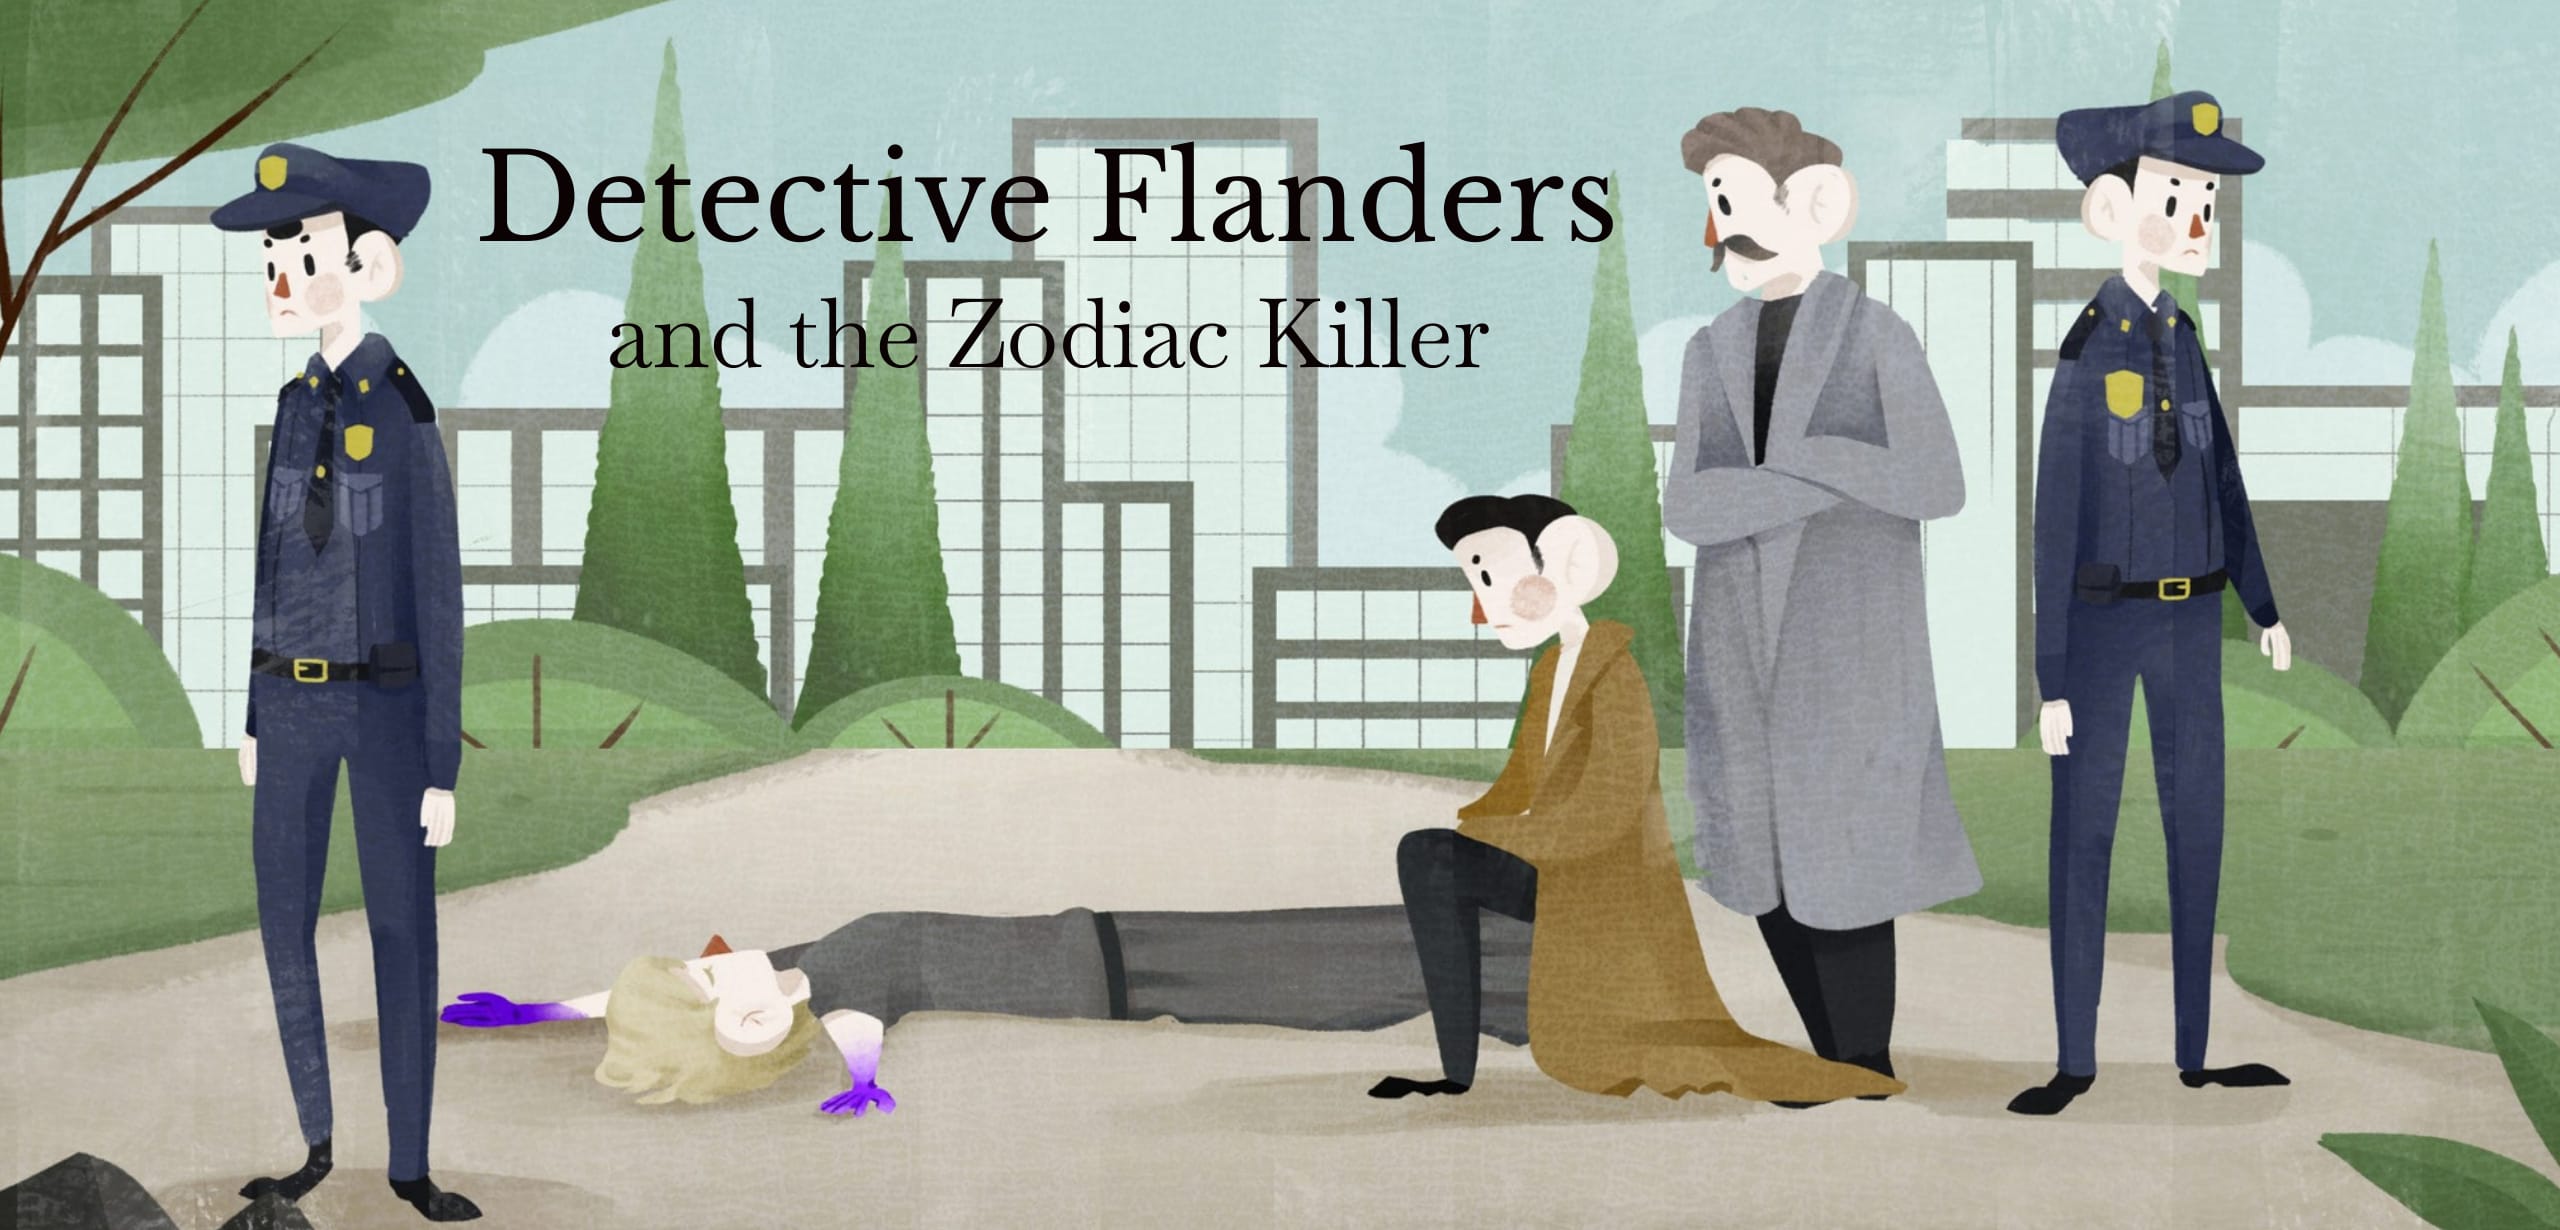 Detective Flanders and the Zodiac Killer